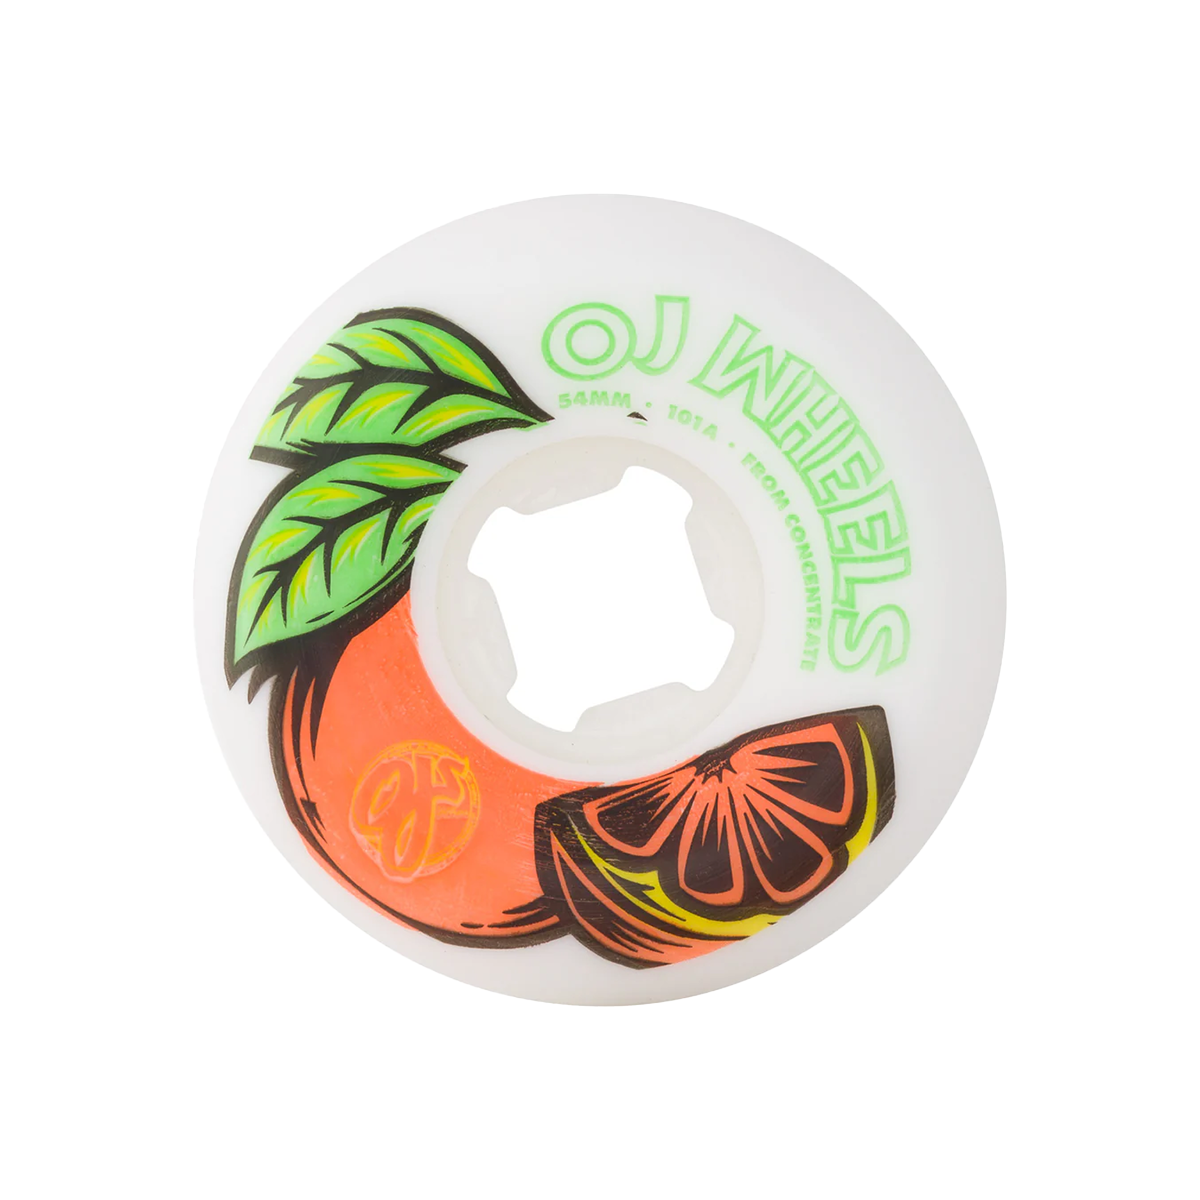 OJ From Concentrate White Orange Hardline Skate Wheels 101A - Assorted Sizes